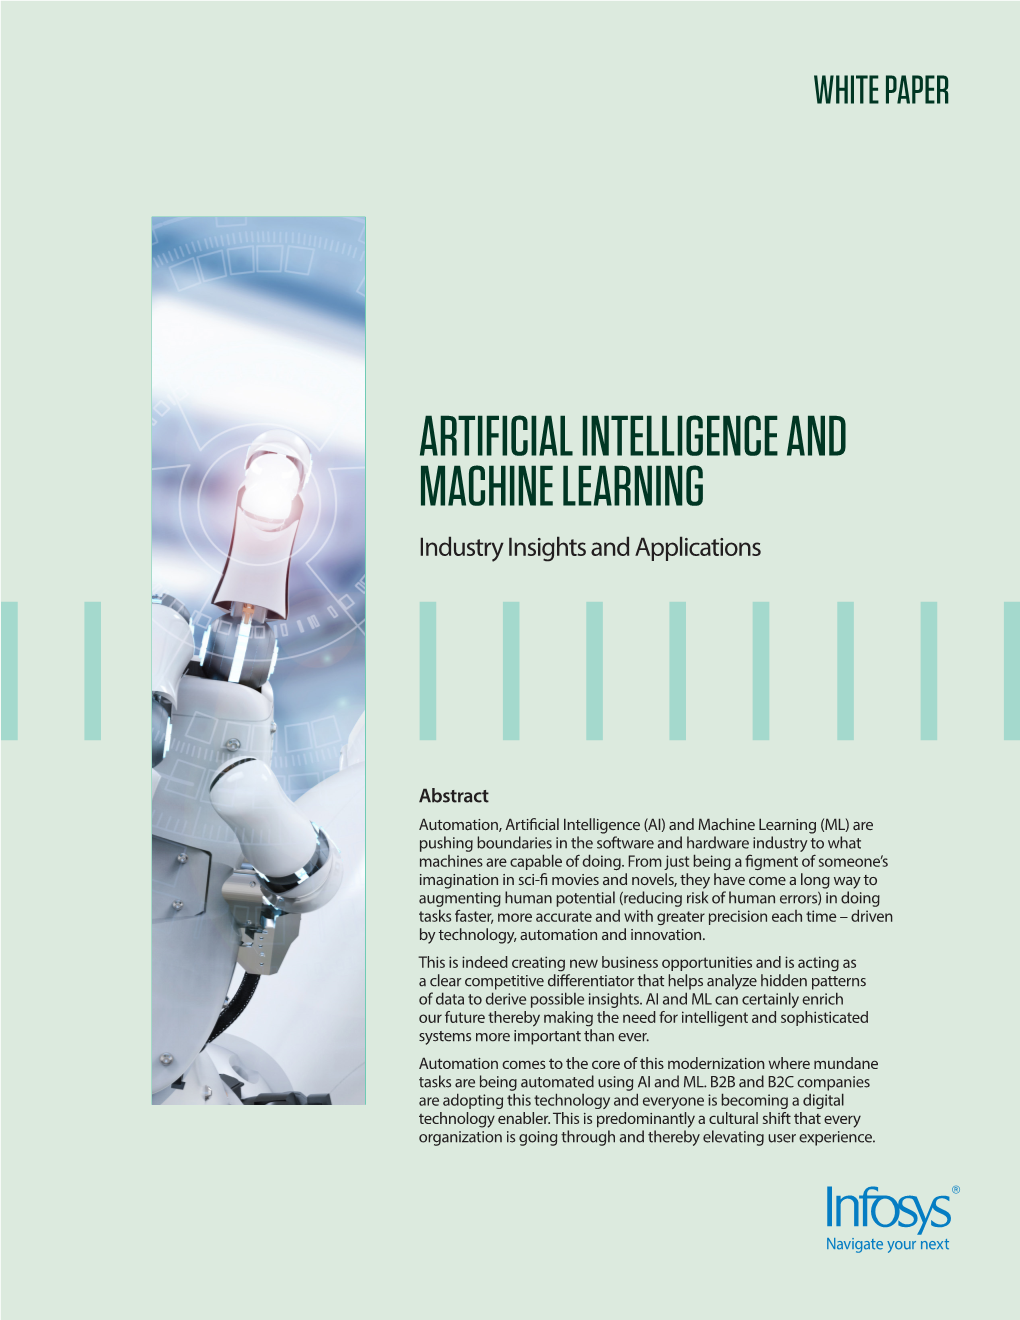 ARTIFICIAL INTELLIGENCE and MACHINE LEARNING Industry Insights and Applications